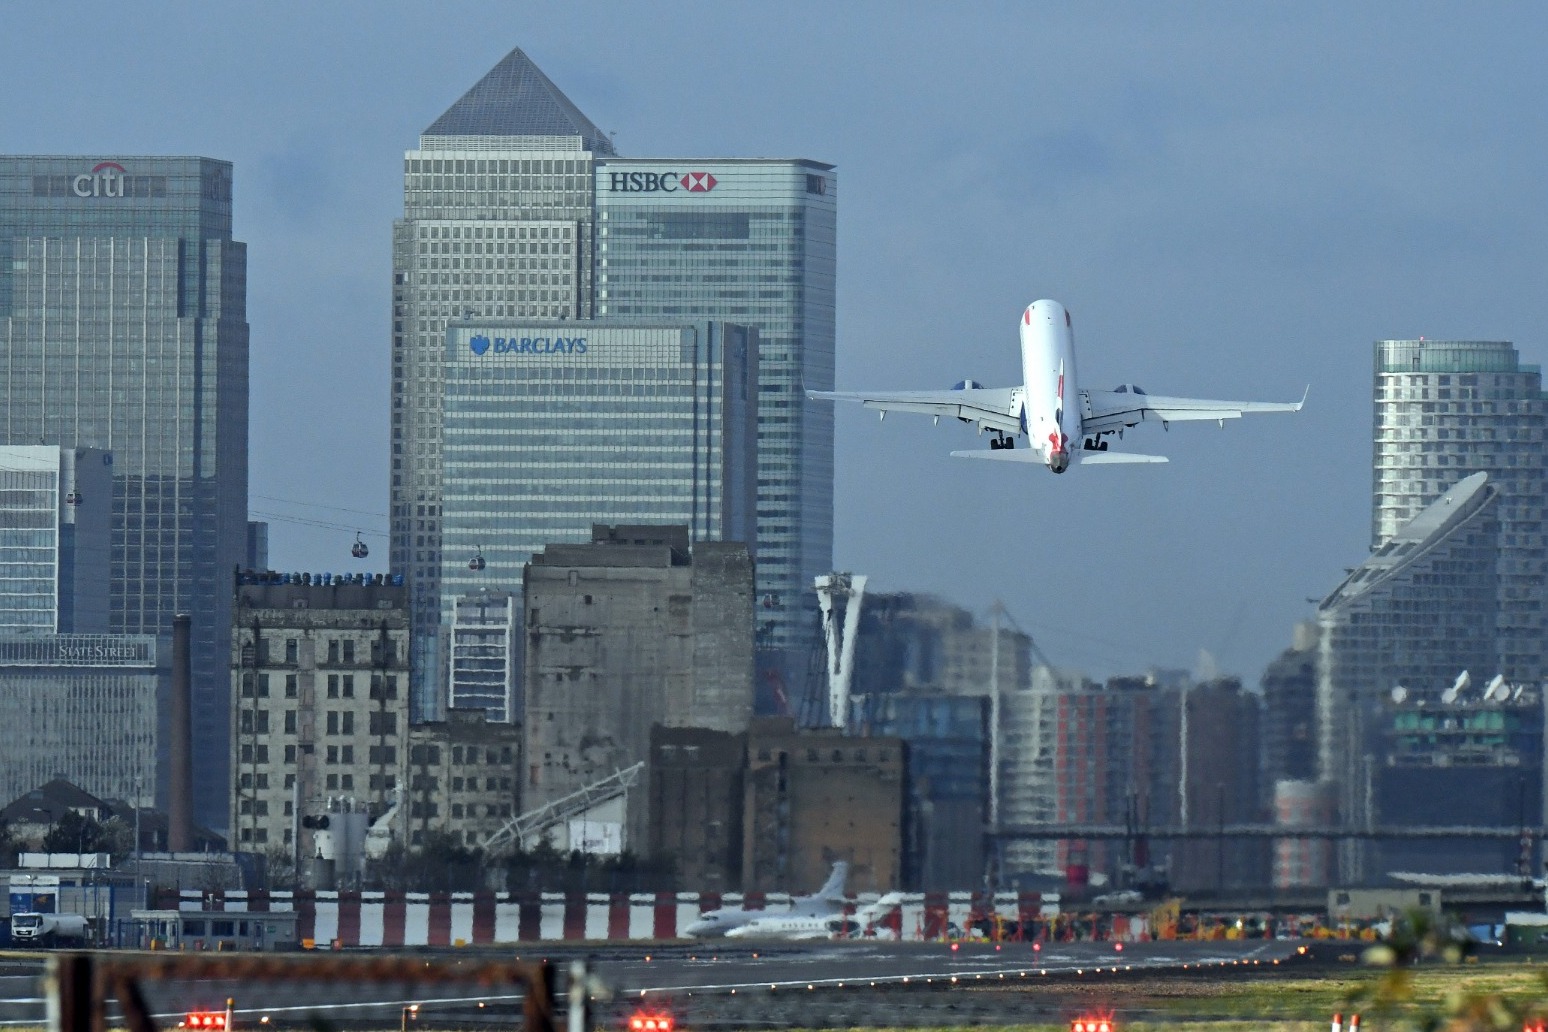 London City airport reopens 